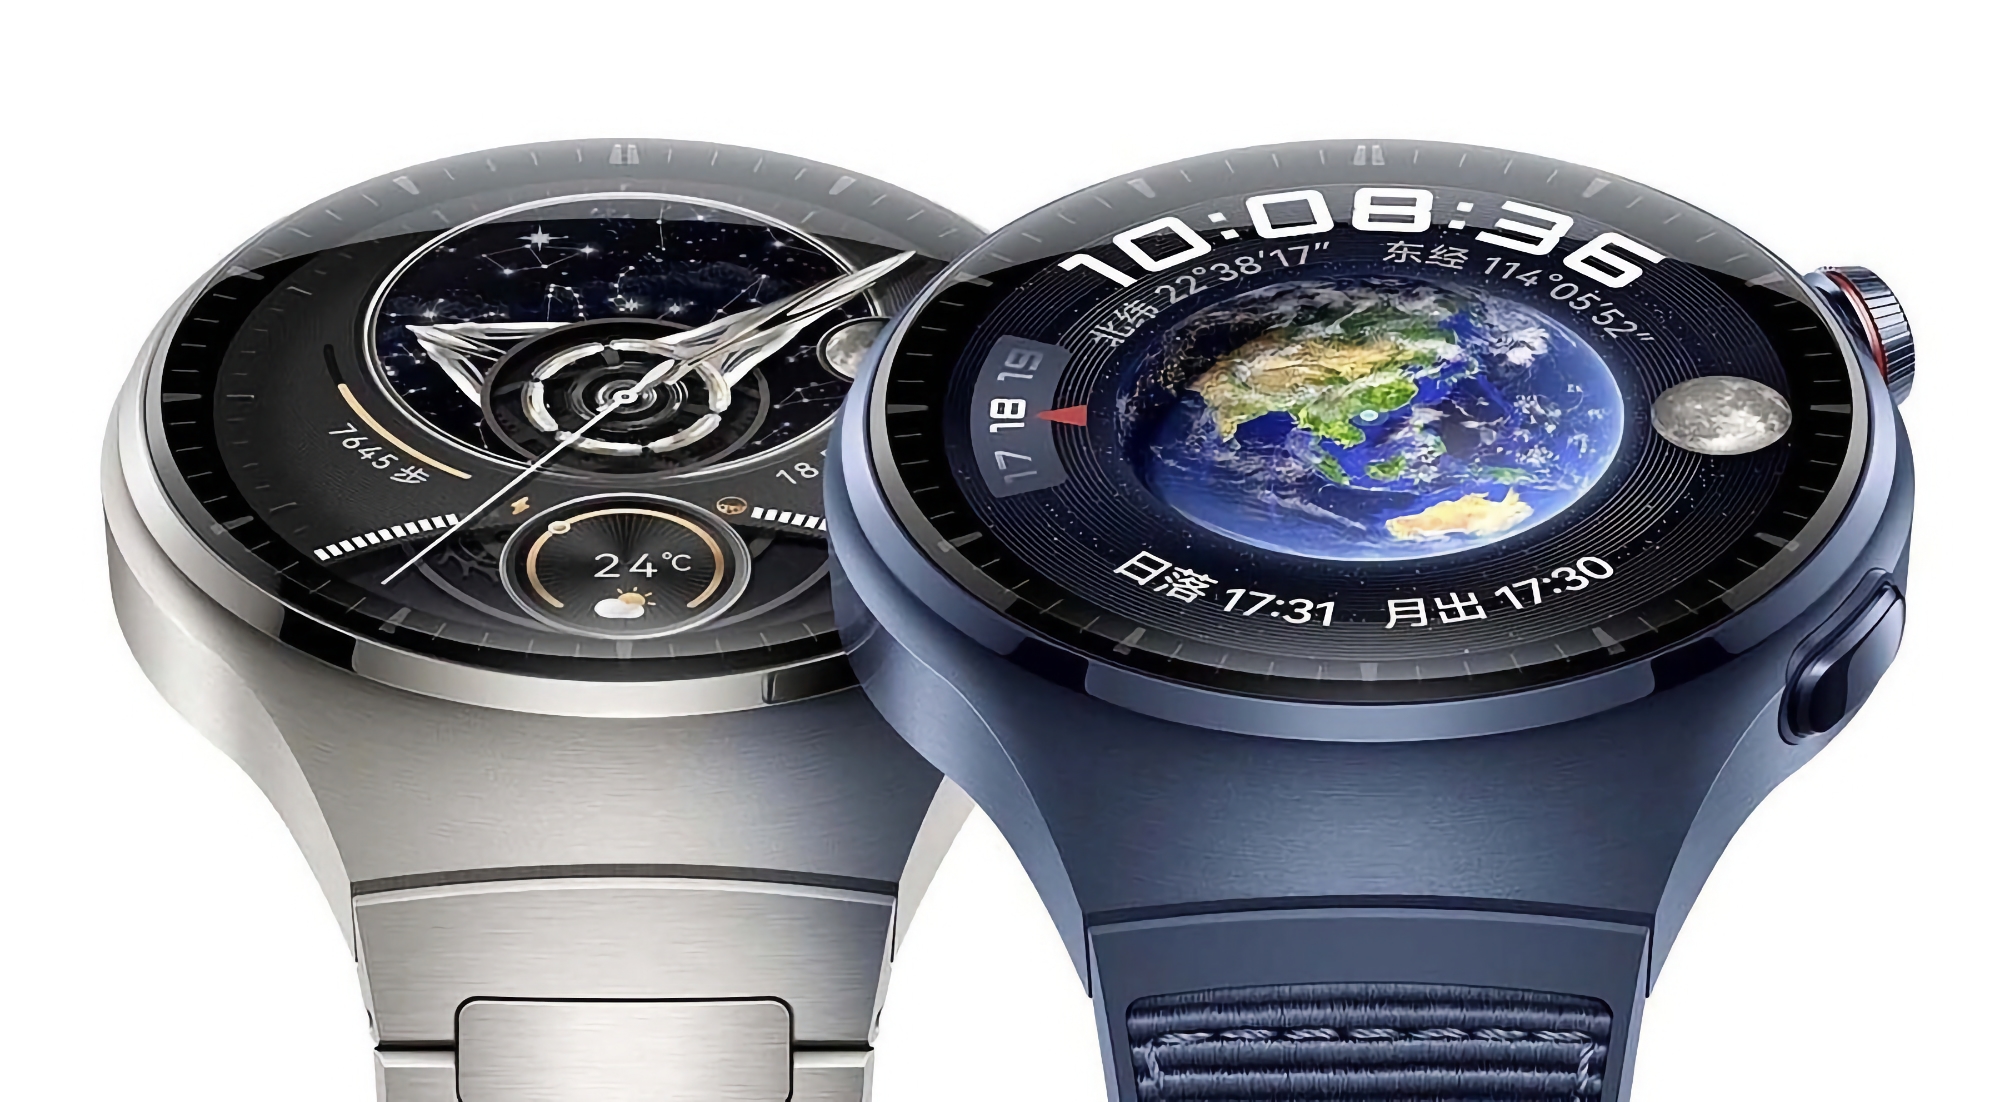 When and which Huawei smartwatches will be equipped with HarmonyOS 4